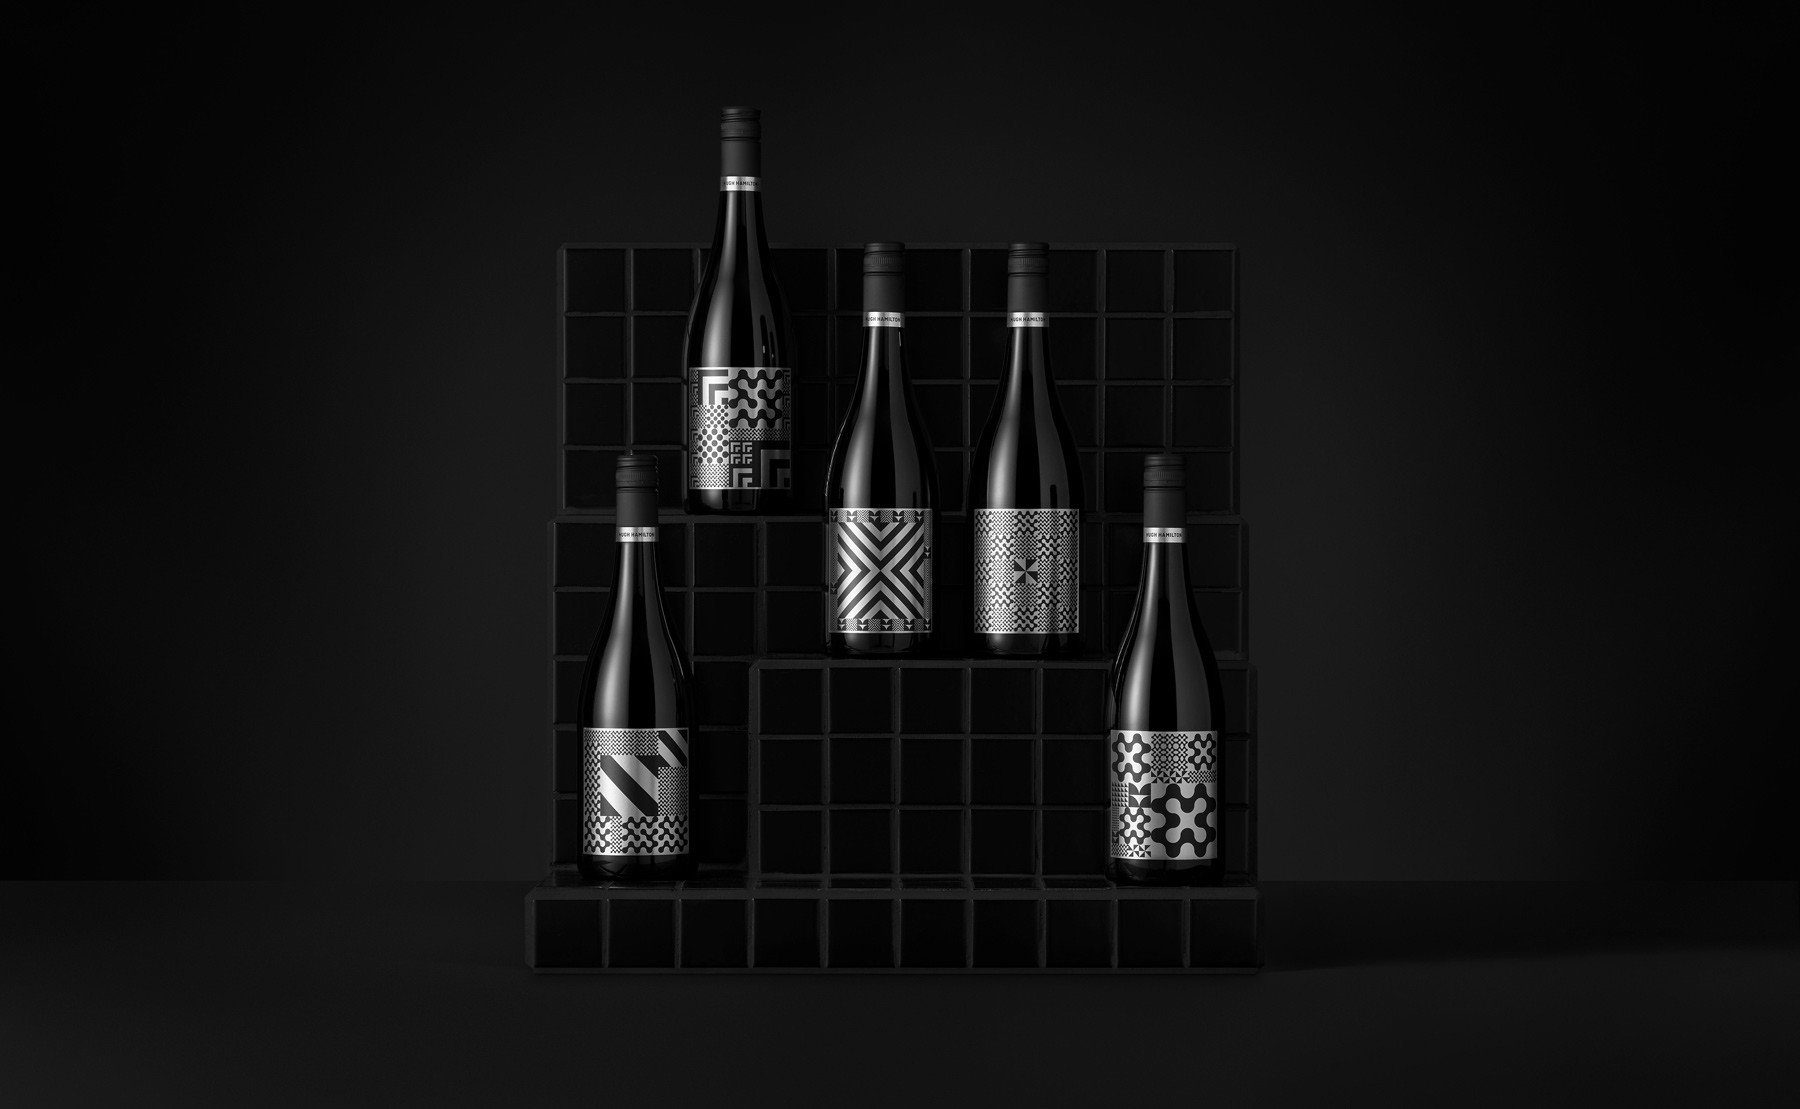 Simple Grid System Combined with Unique Graphic Symbols Inspired Packaging Design Wine Labels